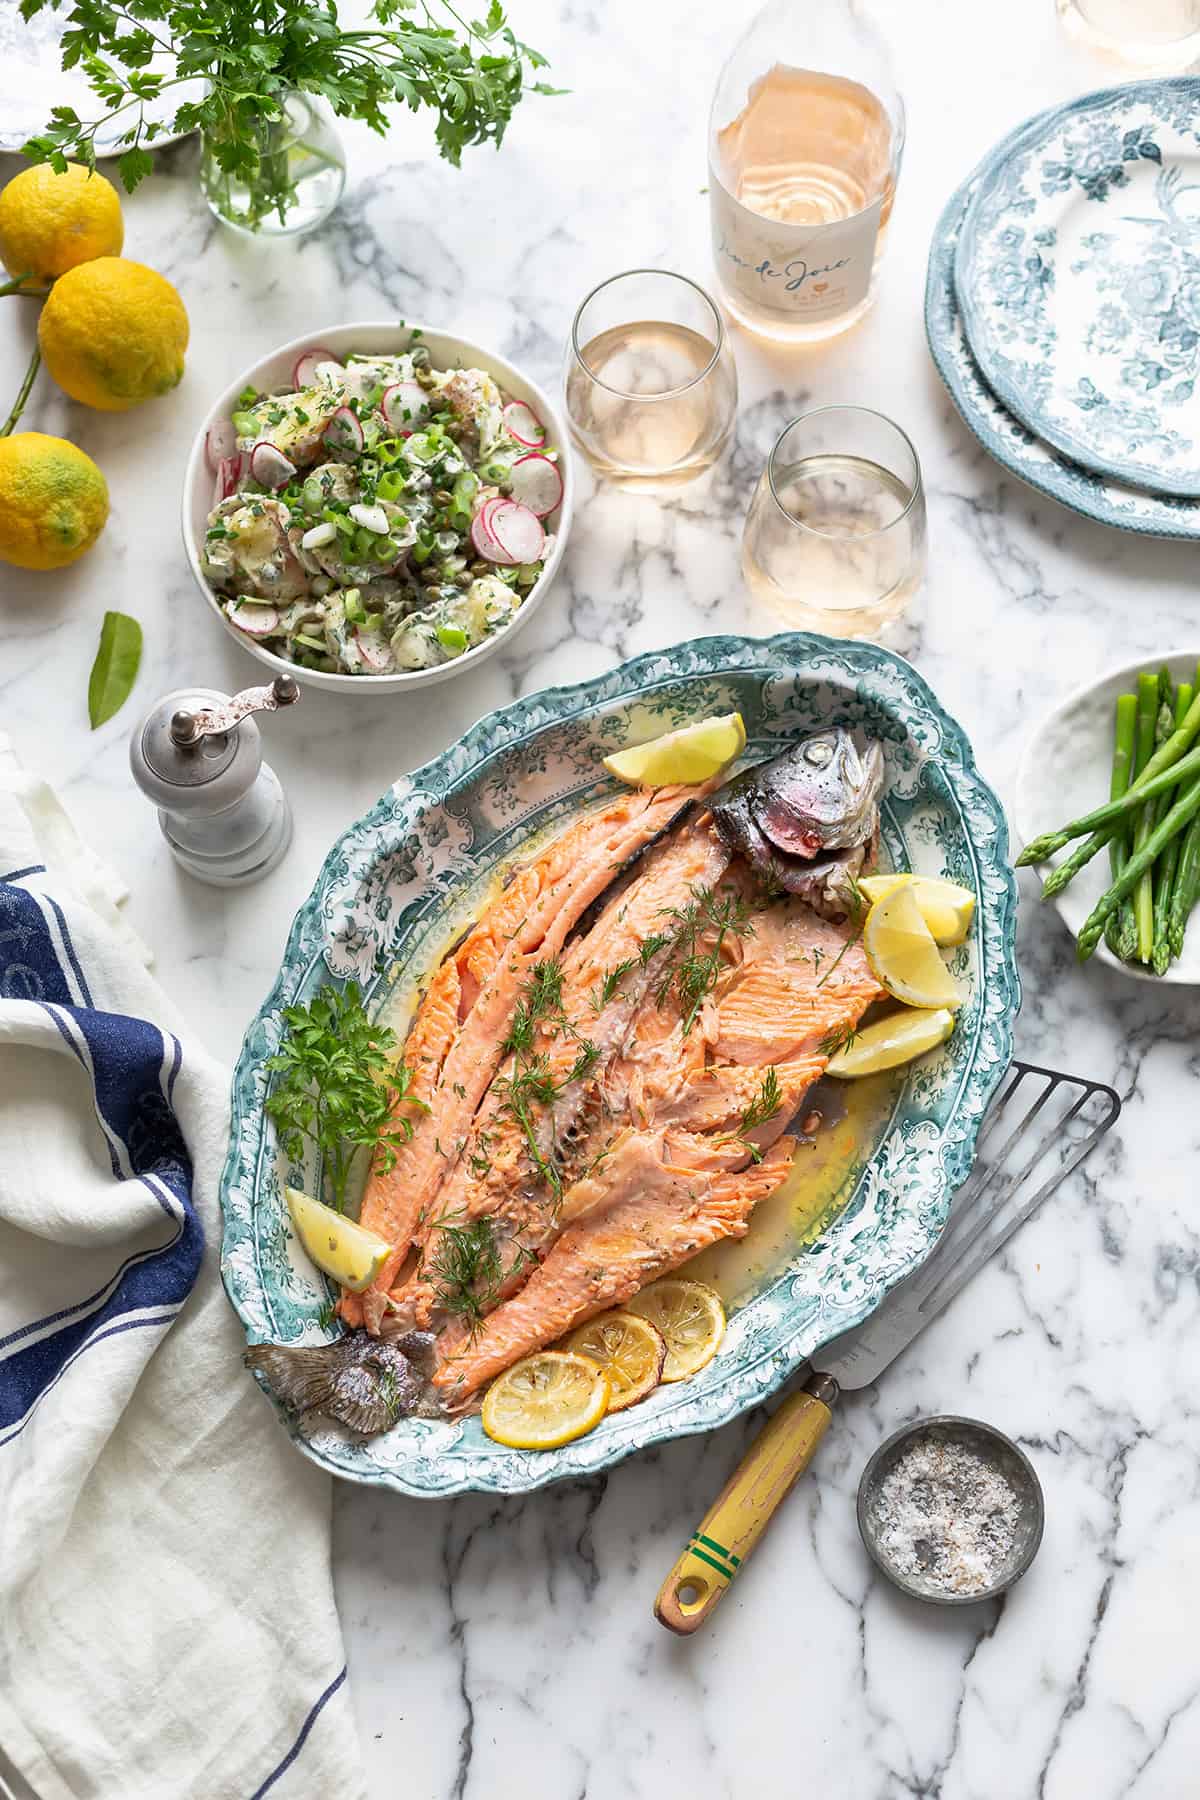 An overhead shot of a whole roasted fish with herbs, lemons, salad and wine surrounding the platter.